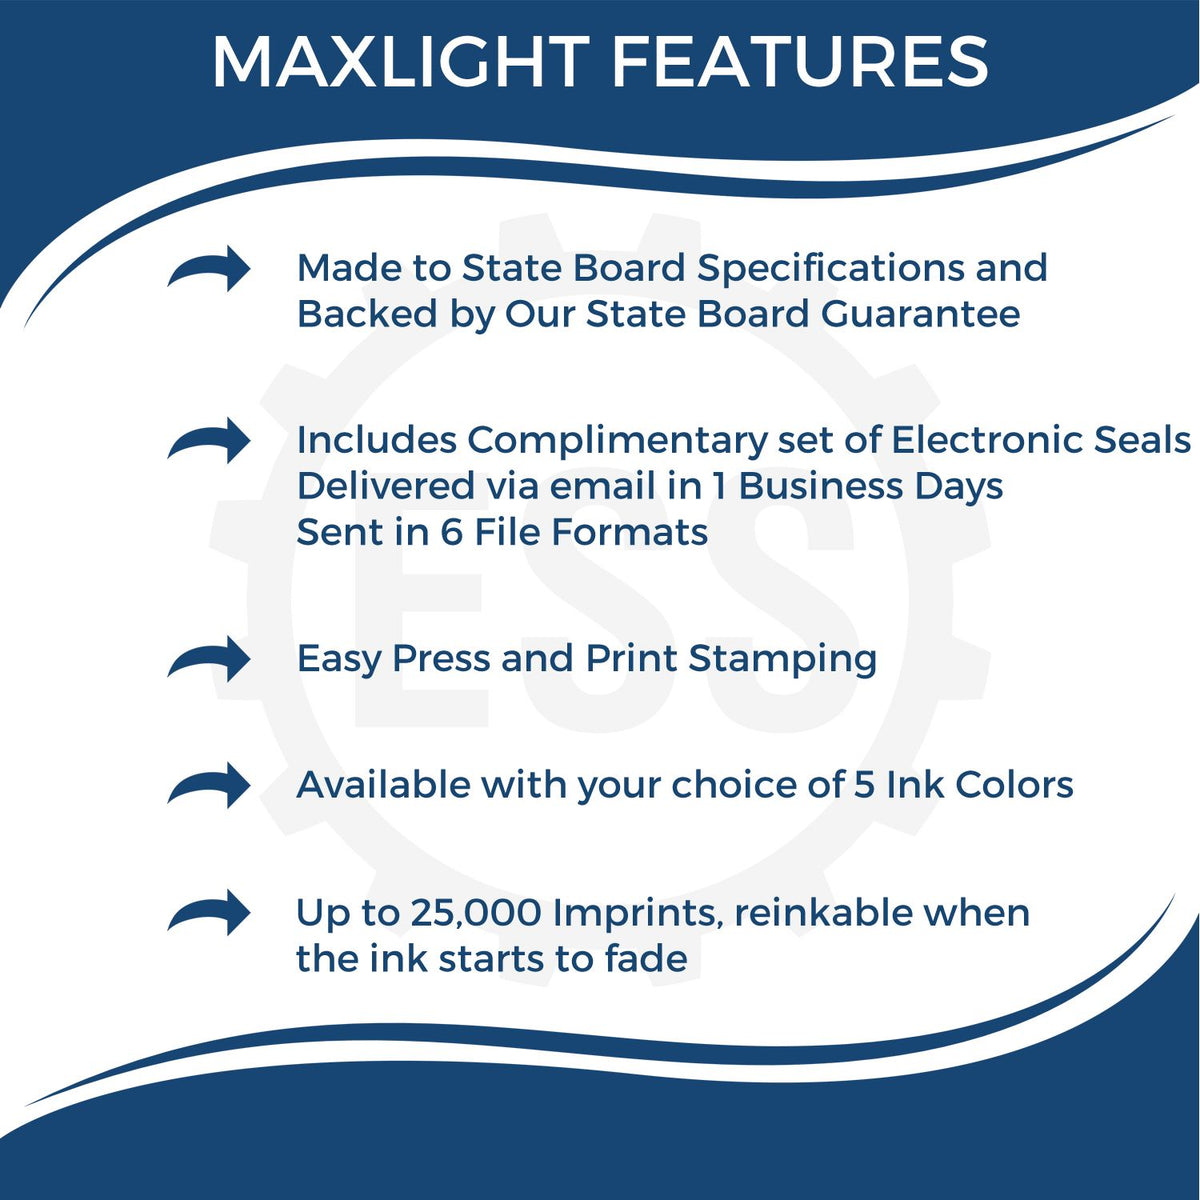 A picture of an infographic highlighting the selling points for the MaxLight Premium Pre-Inked South Dakota Rectangular Notarial Stamp